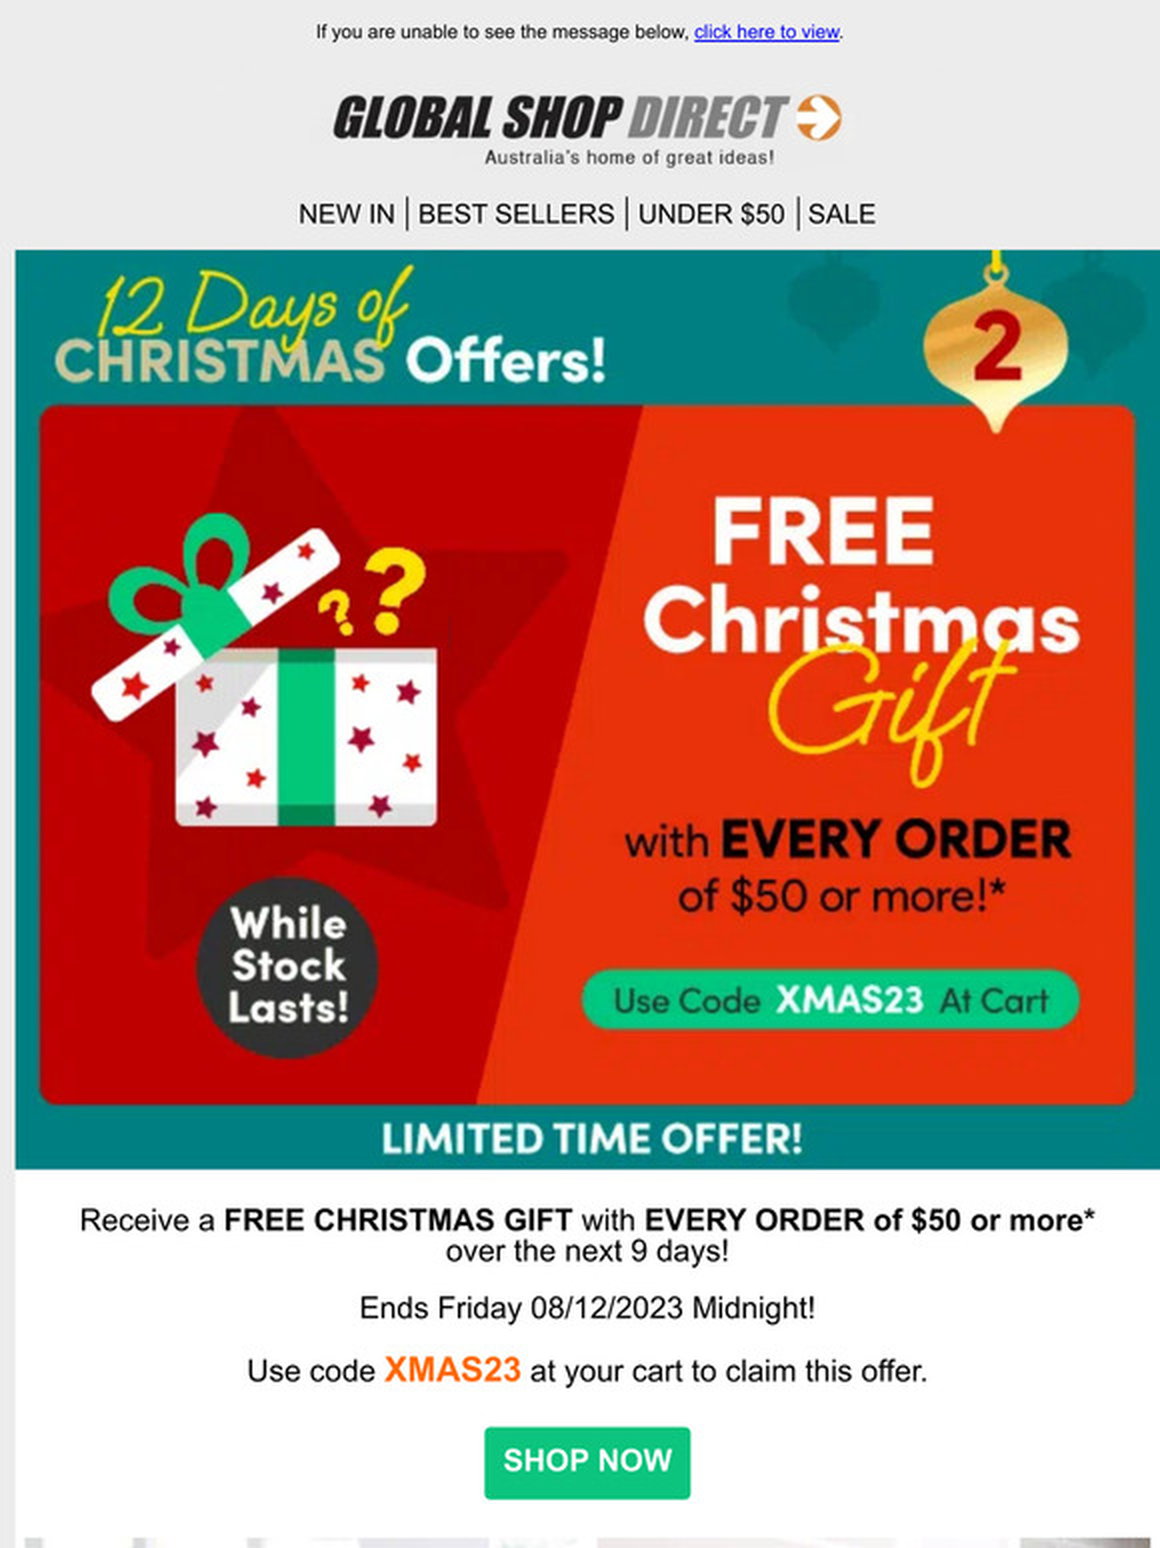 FREE Christmas Gift With Every $50+ Order!